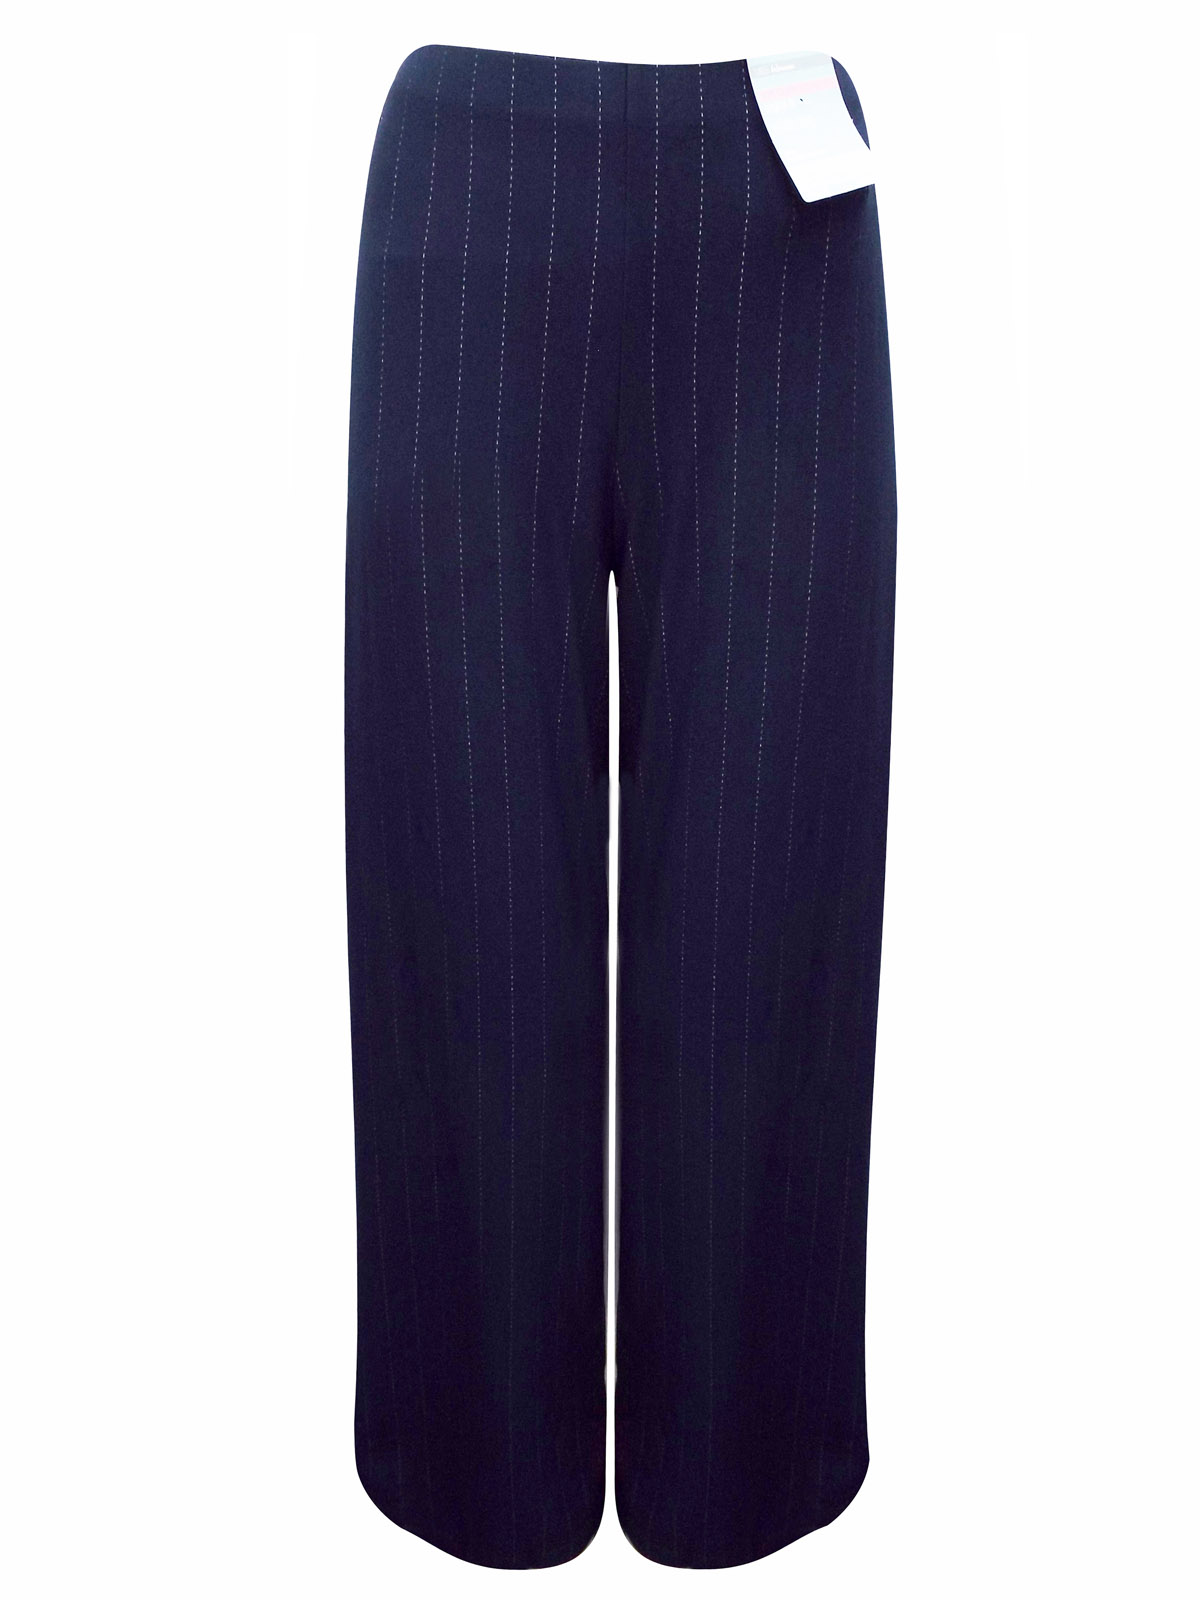 Marks and Spencer - - M&5 NAVY Wide Leg Pinstriped Trousers - Size 12 to 18